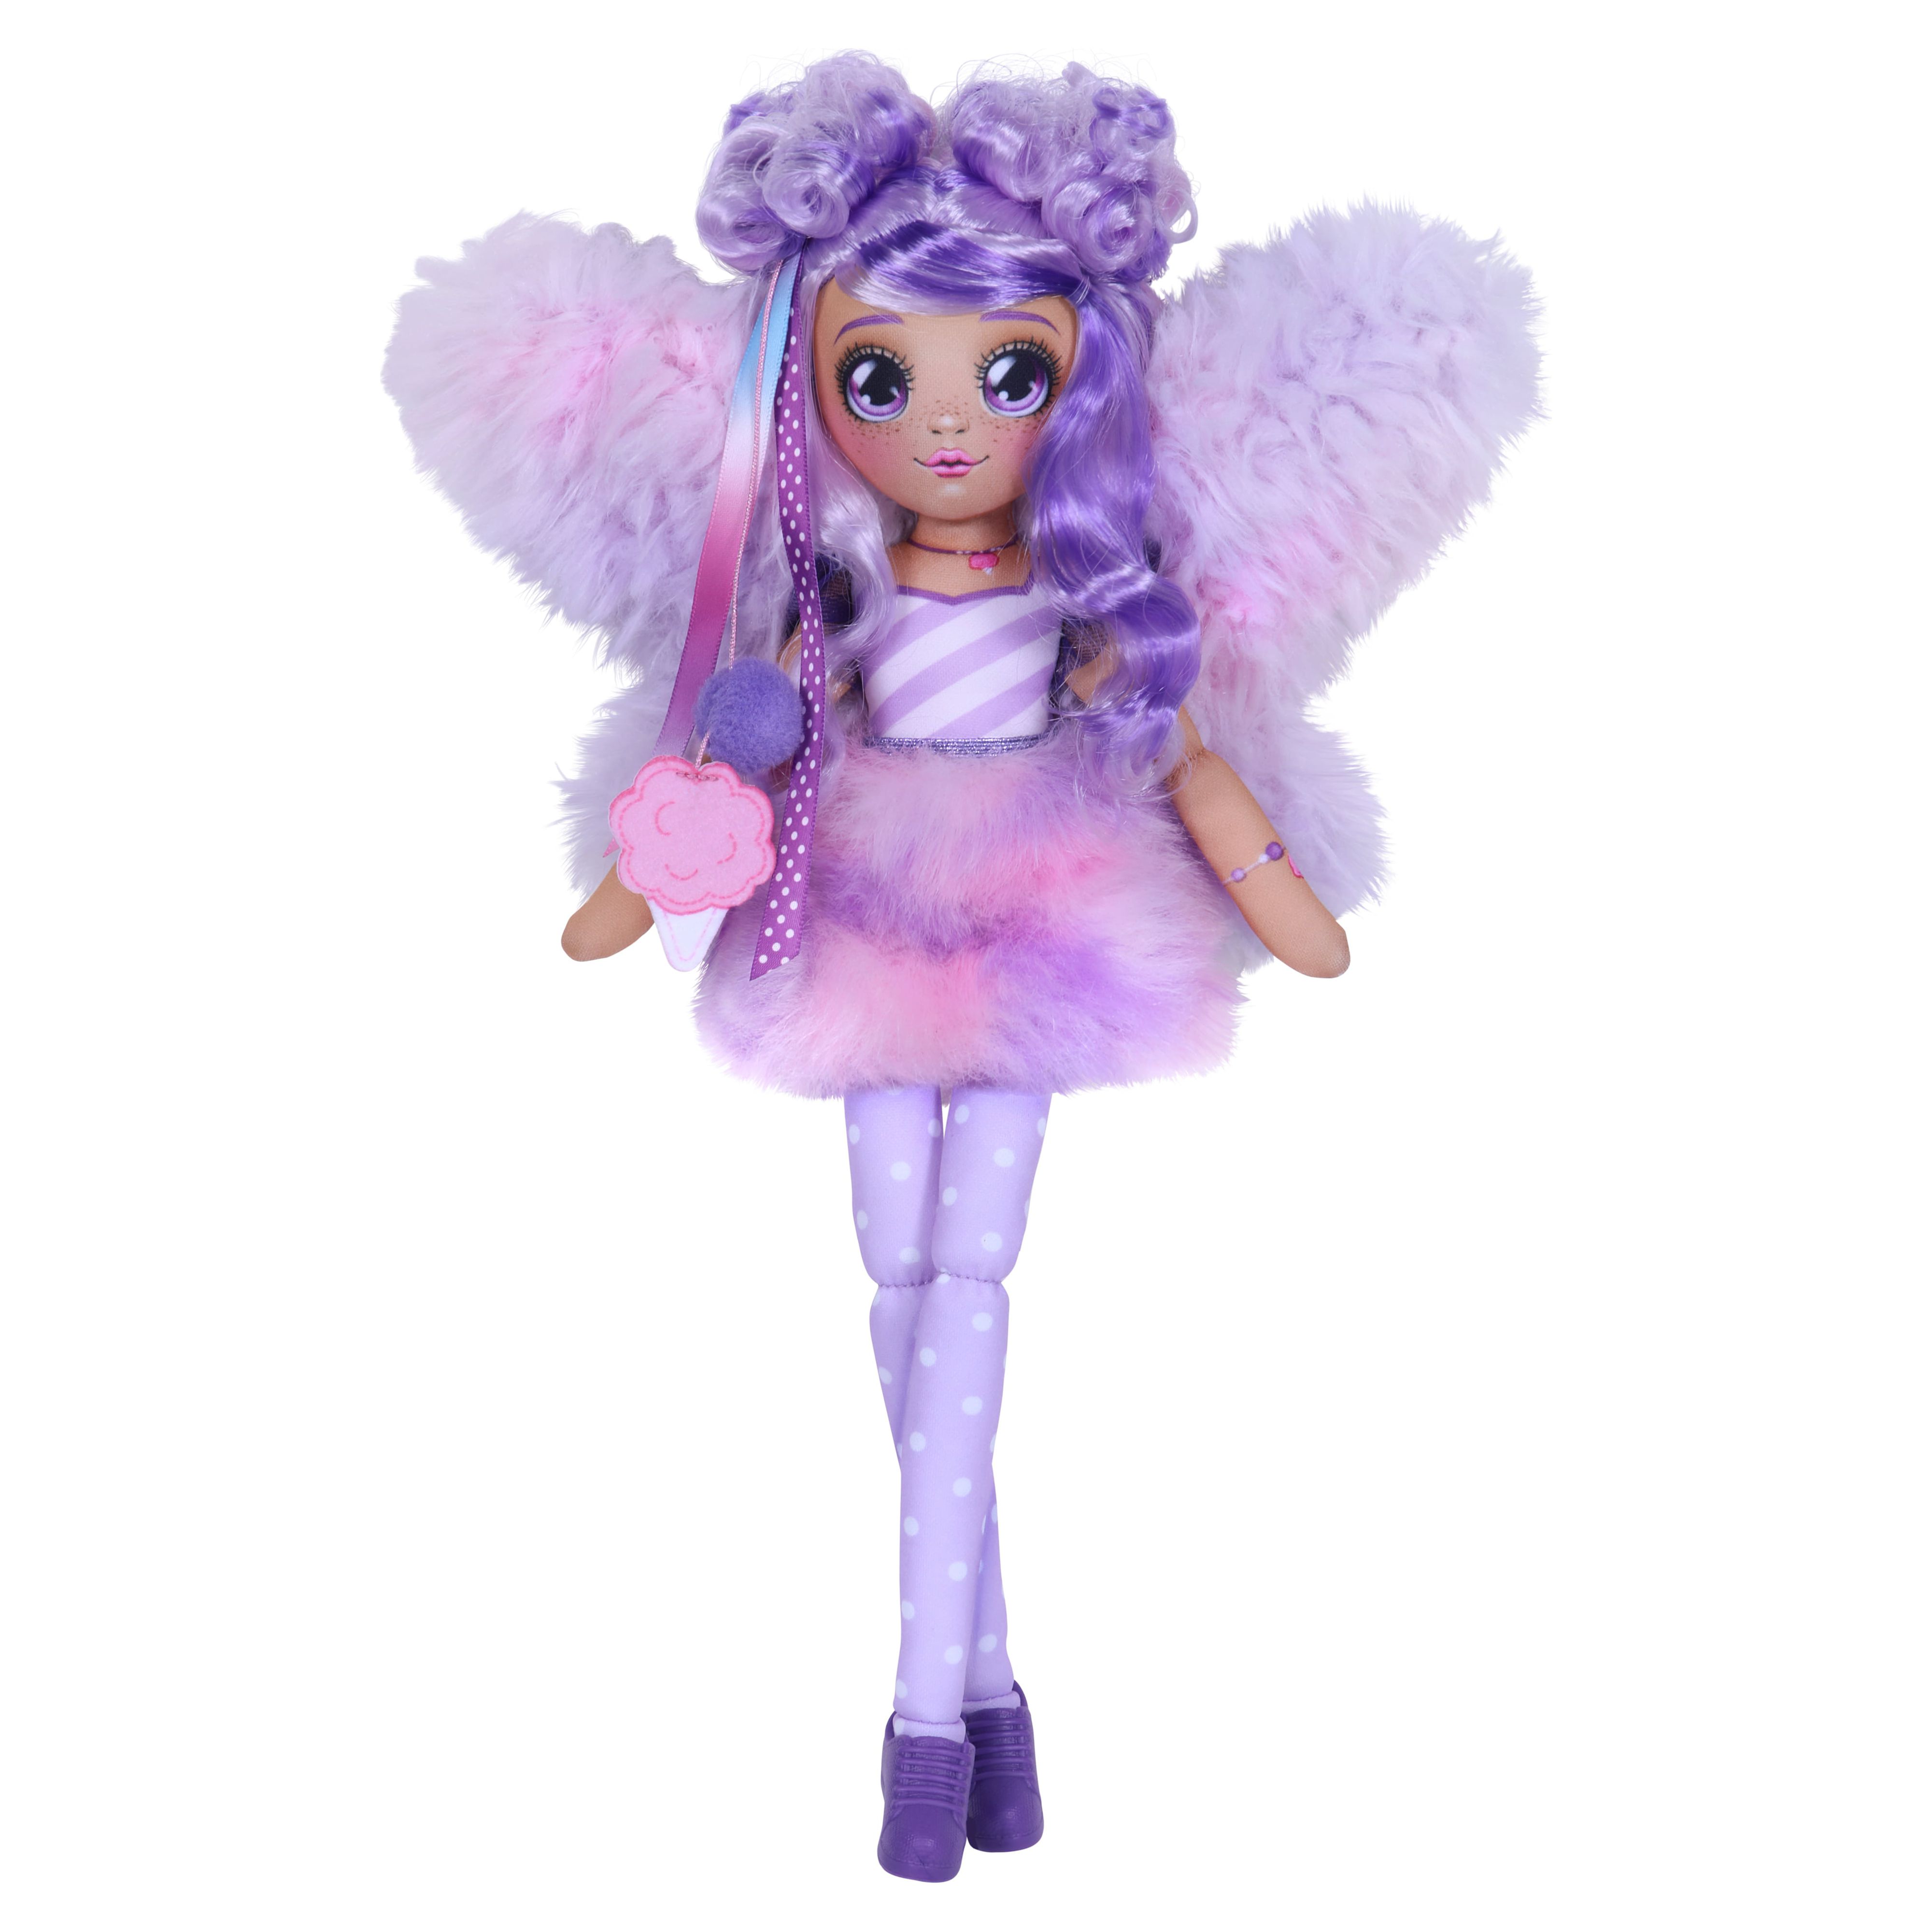 Dream Seeker Magical Fairy Fashion Doll 3 Pack, Candice, Lolli-Ana and Coco, Girls 5+ - image 4 of 13